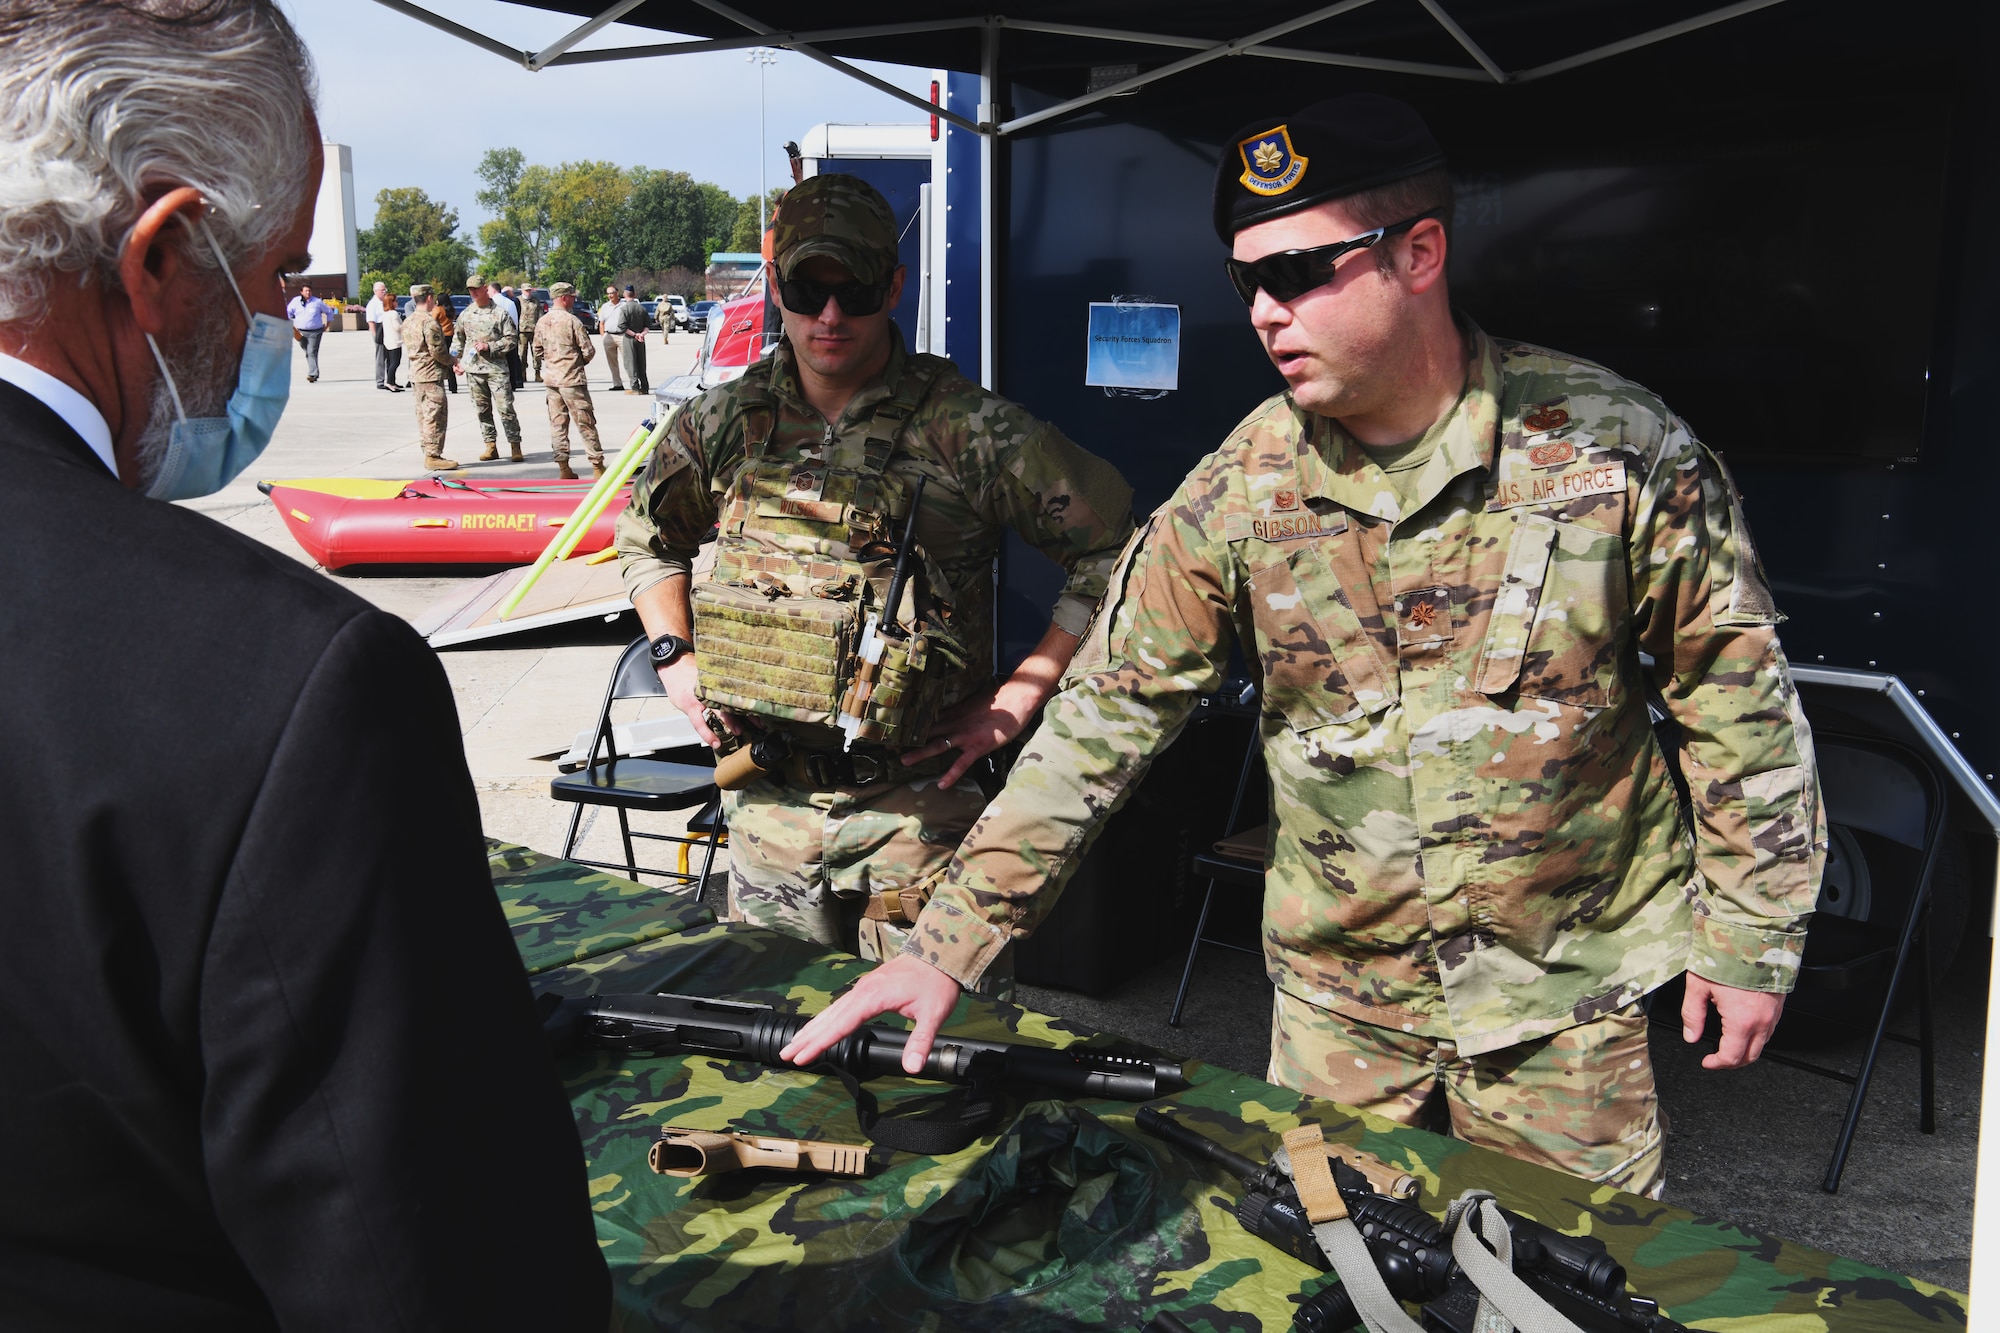 U.S. Air Force Maj. Michael Gibson, commander of the 178th Wing Security Forces Squadron, explains the capabilities of the equipment used by his Airmen during Community Day Sept. 16, 2021 at the 178th Wing in Springfield, Ohio. The event enhanced awareness of the missions and capabilites of the wing. (U.S. Air National Guard photo by Shane Hughes)